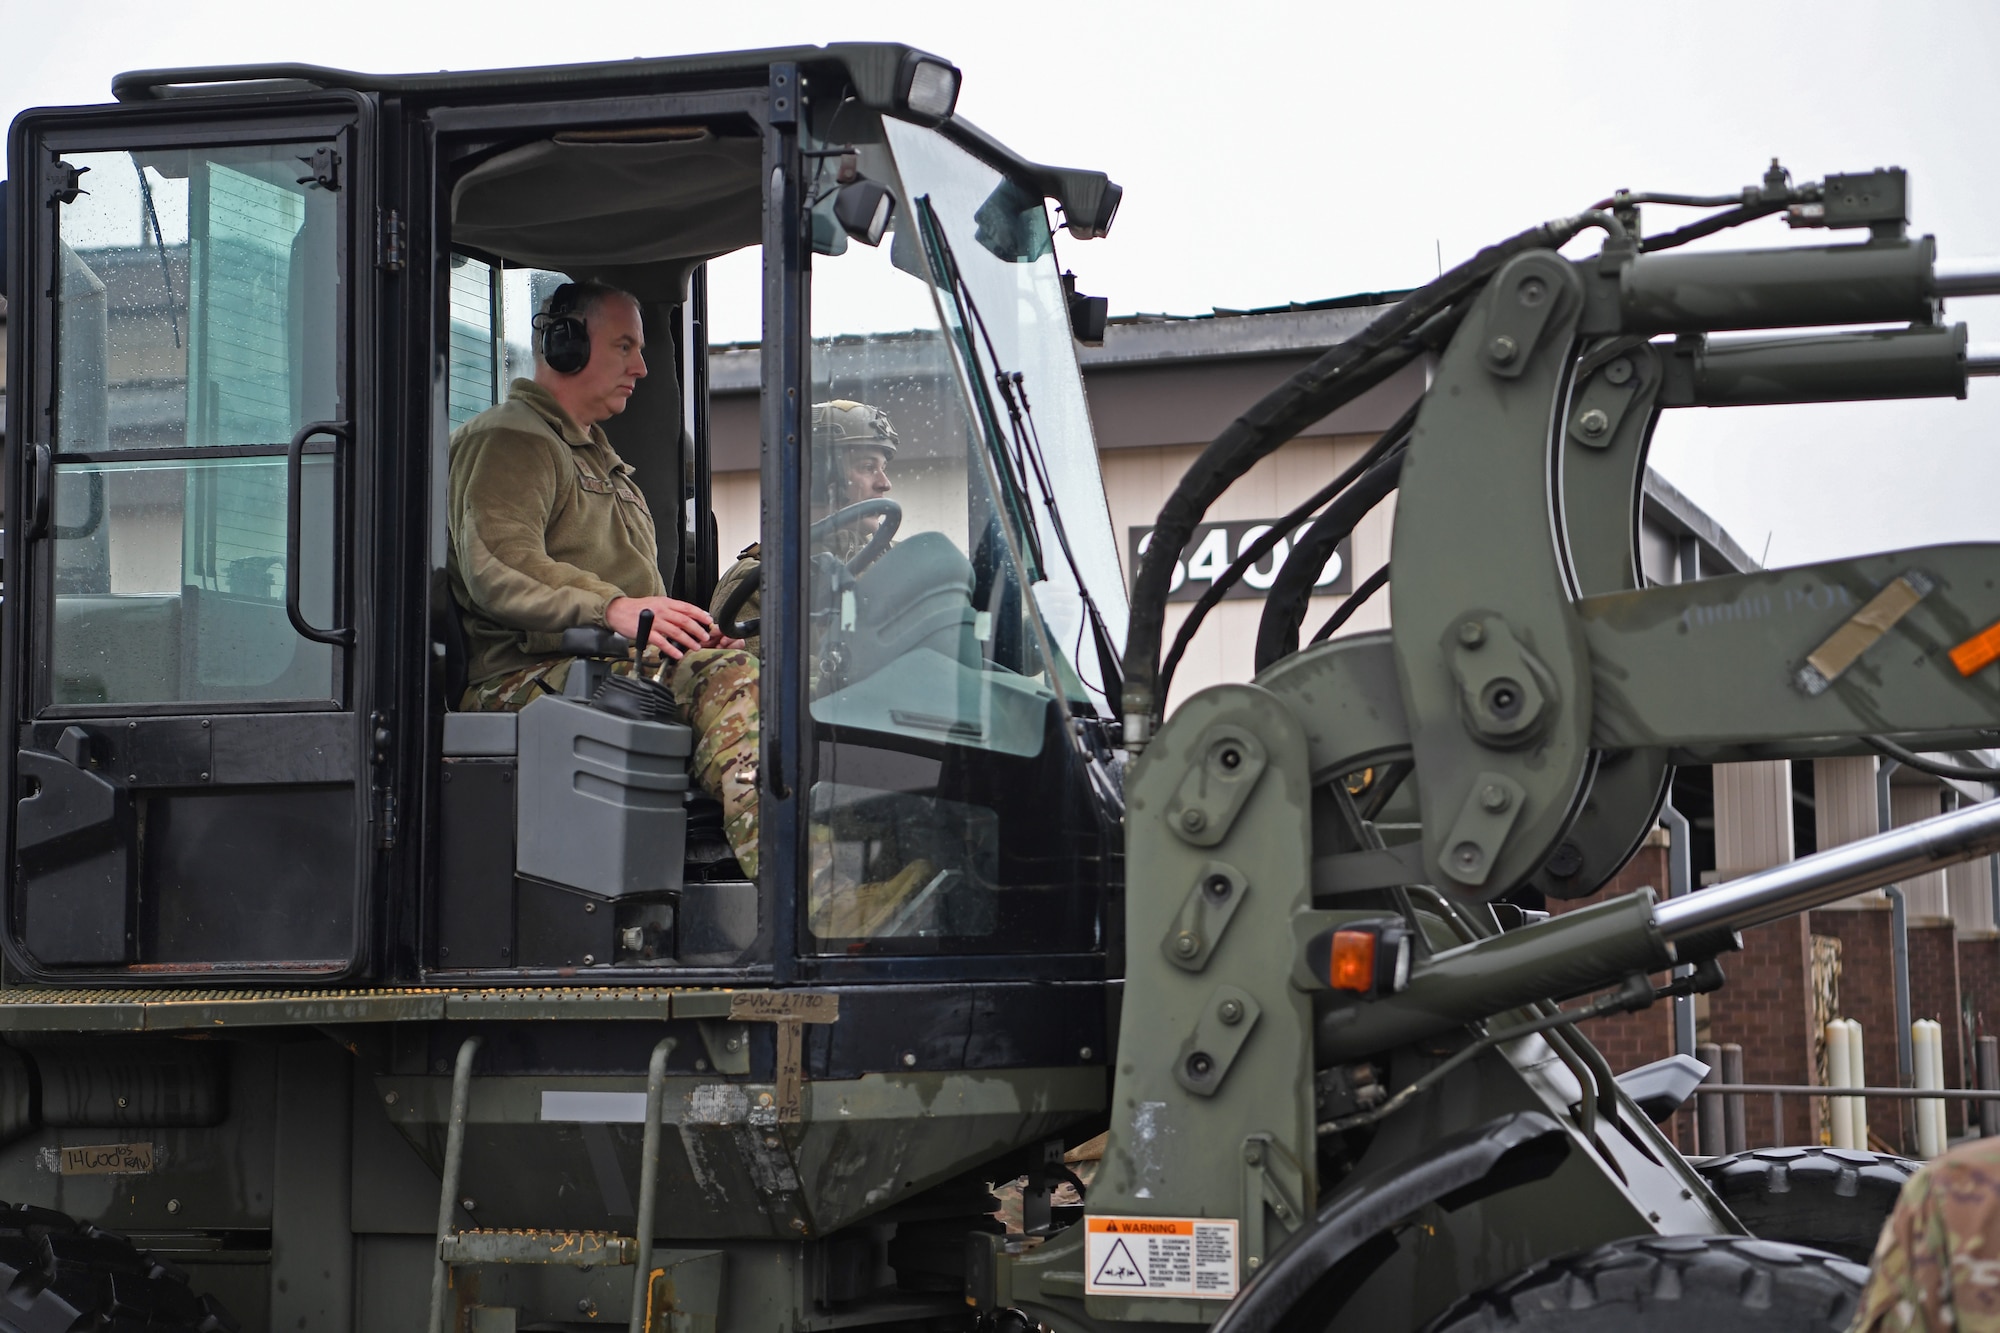 Maj. Gen. John Gordy, U.S. Air Force Expeditionary Center commander, operates a 10K All Terrain forklift at the Global Deployment Readiness Center, Joint Base McGuire-Dix-Lakehurst, New Jersey Dec. 17, 2019. Gordy spent the day with 621st Contingency Response Wing Airmen learning various aspects of the CRW mission. (U.S. Air Force photo by Tech. Sgt. Luther Mitchell)